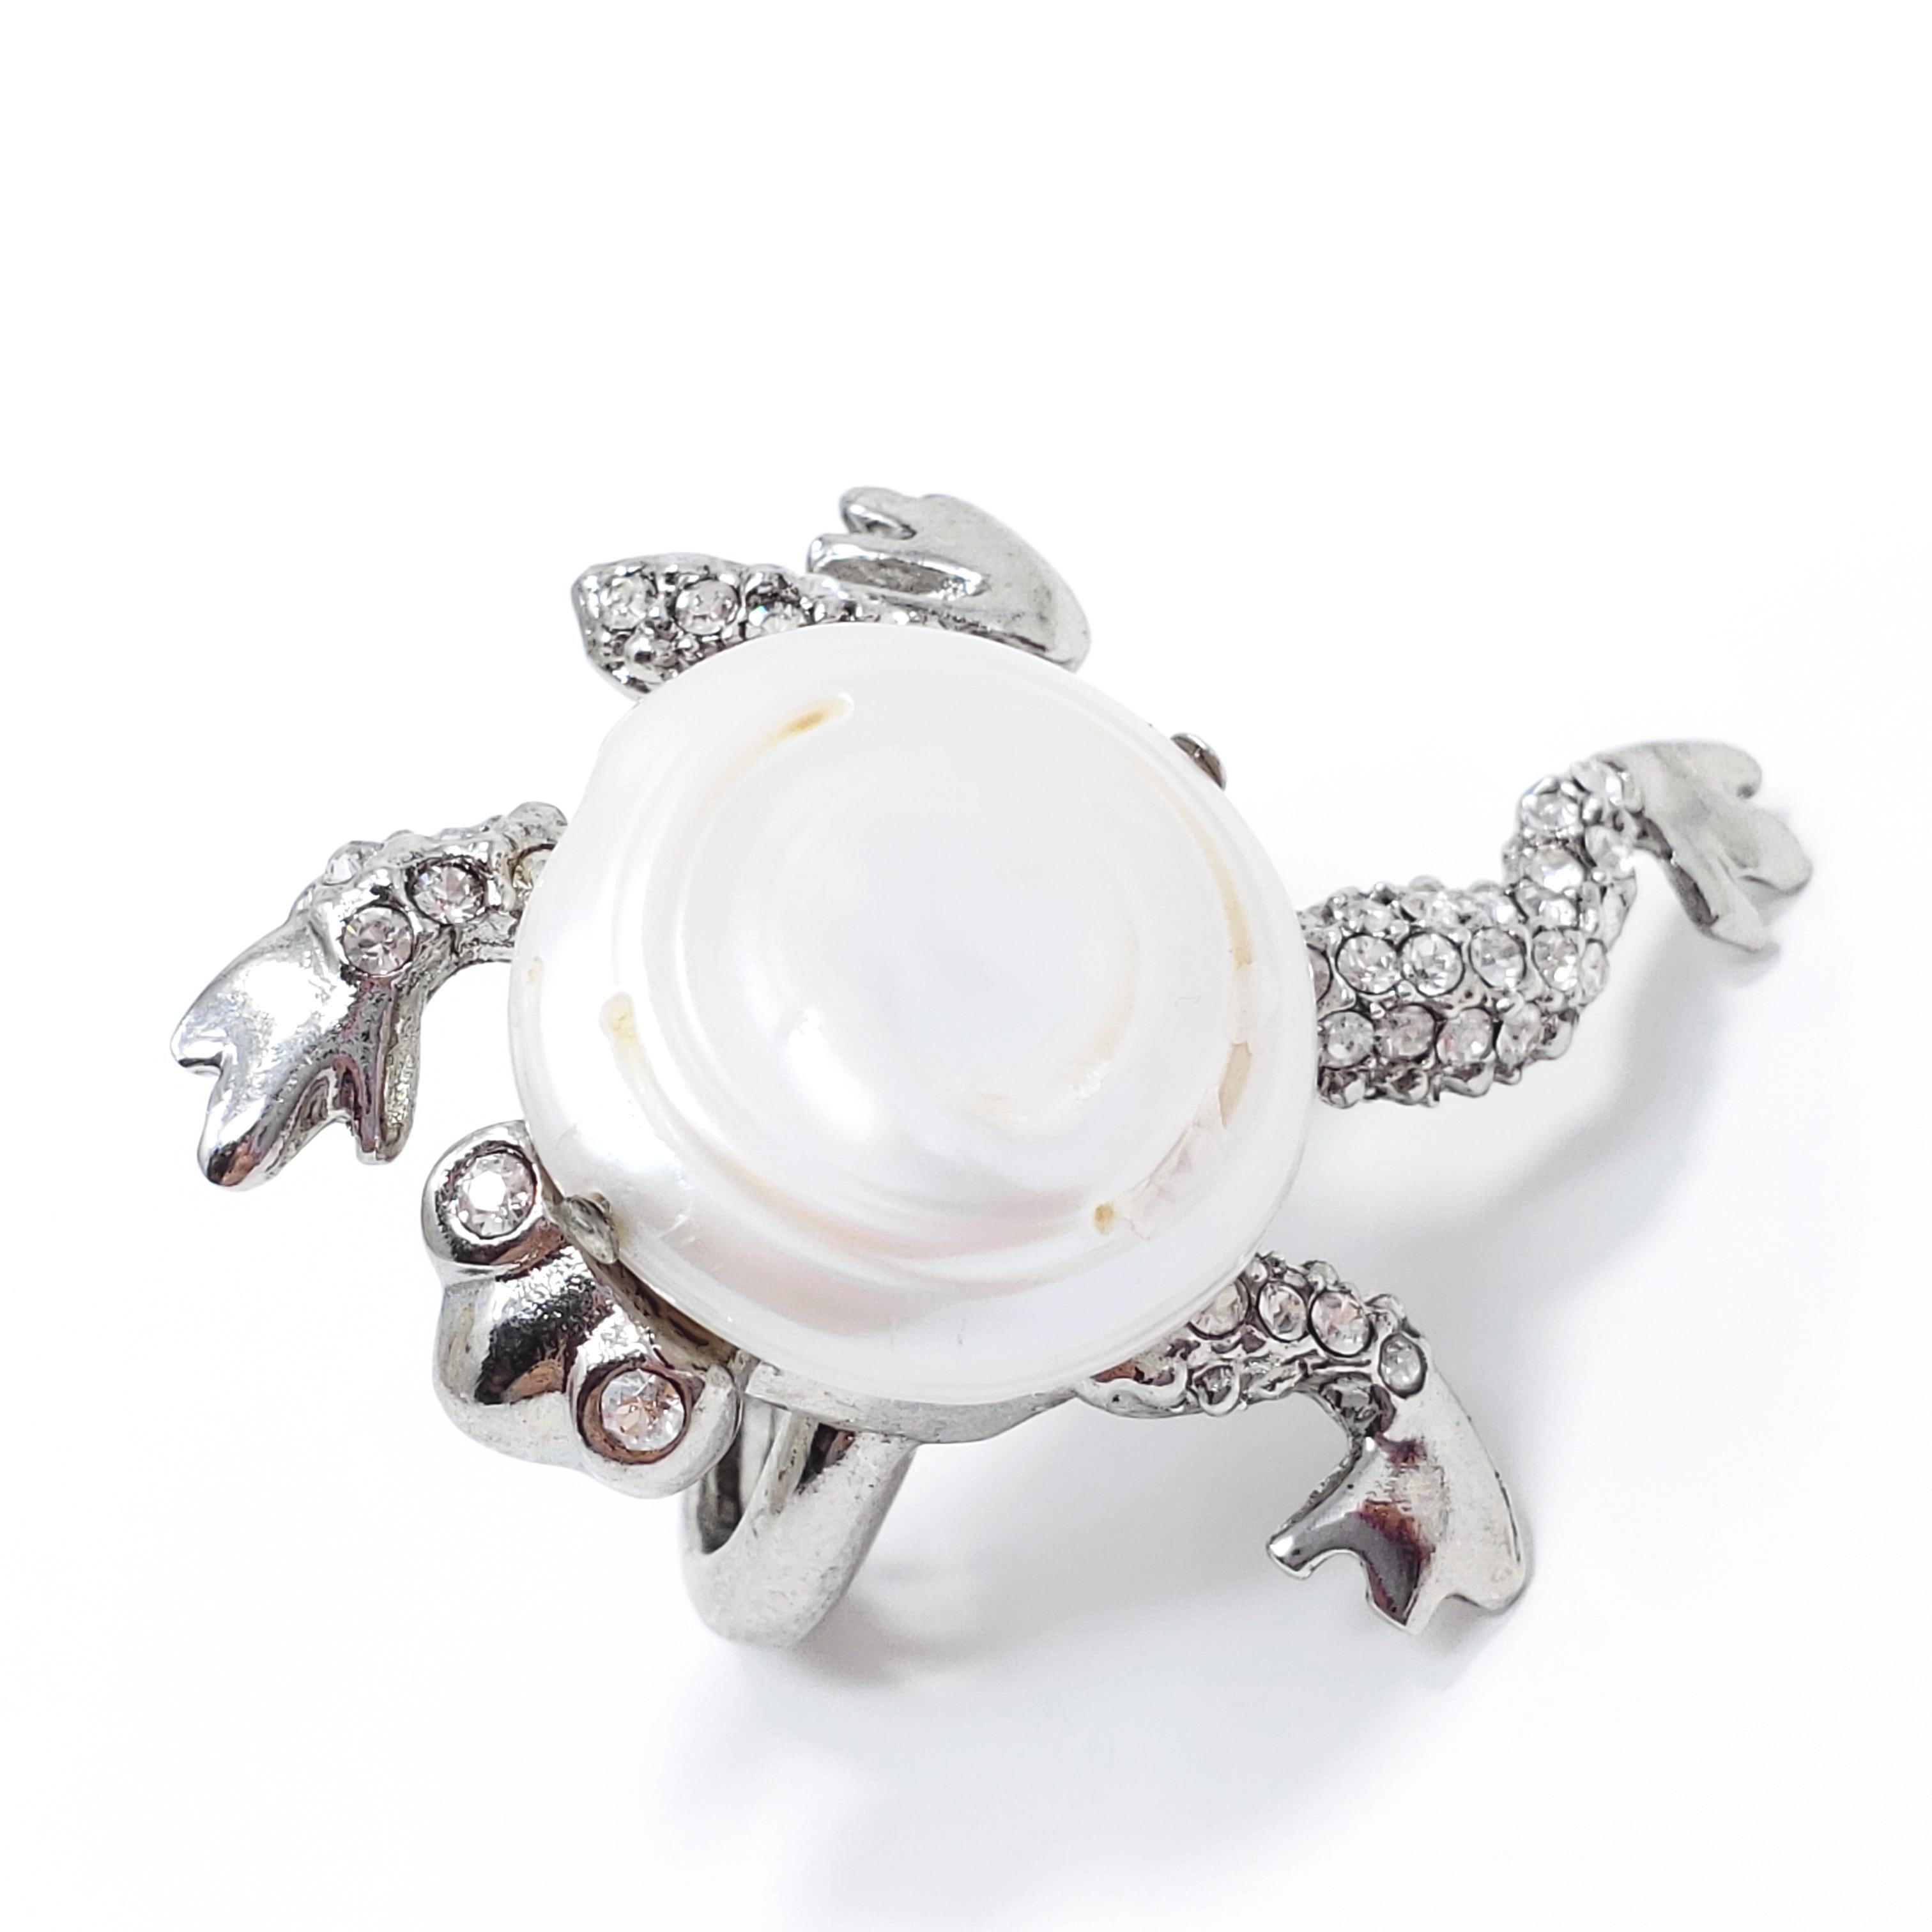 Women's Oscar de la Renta Mother of Pearl, Pave Crystal, Rhodium Plated Frog Ring